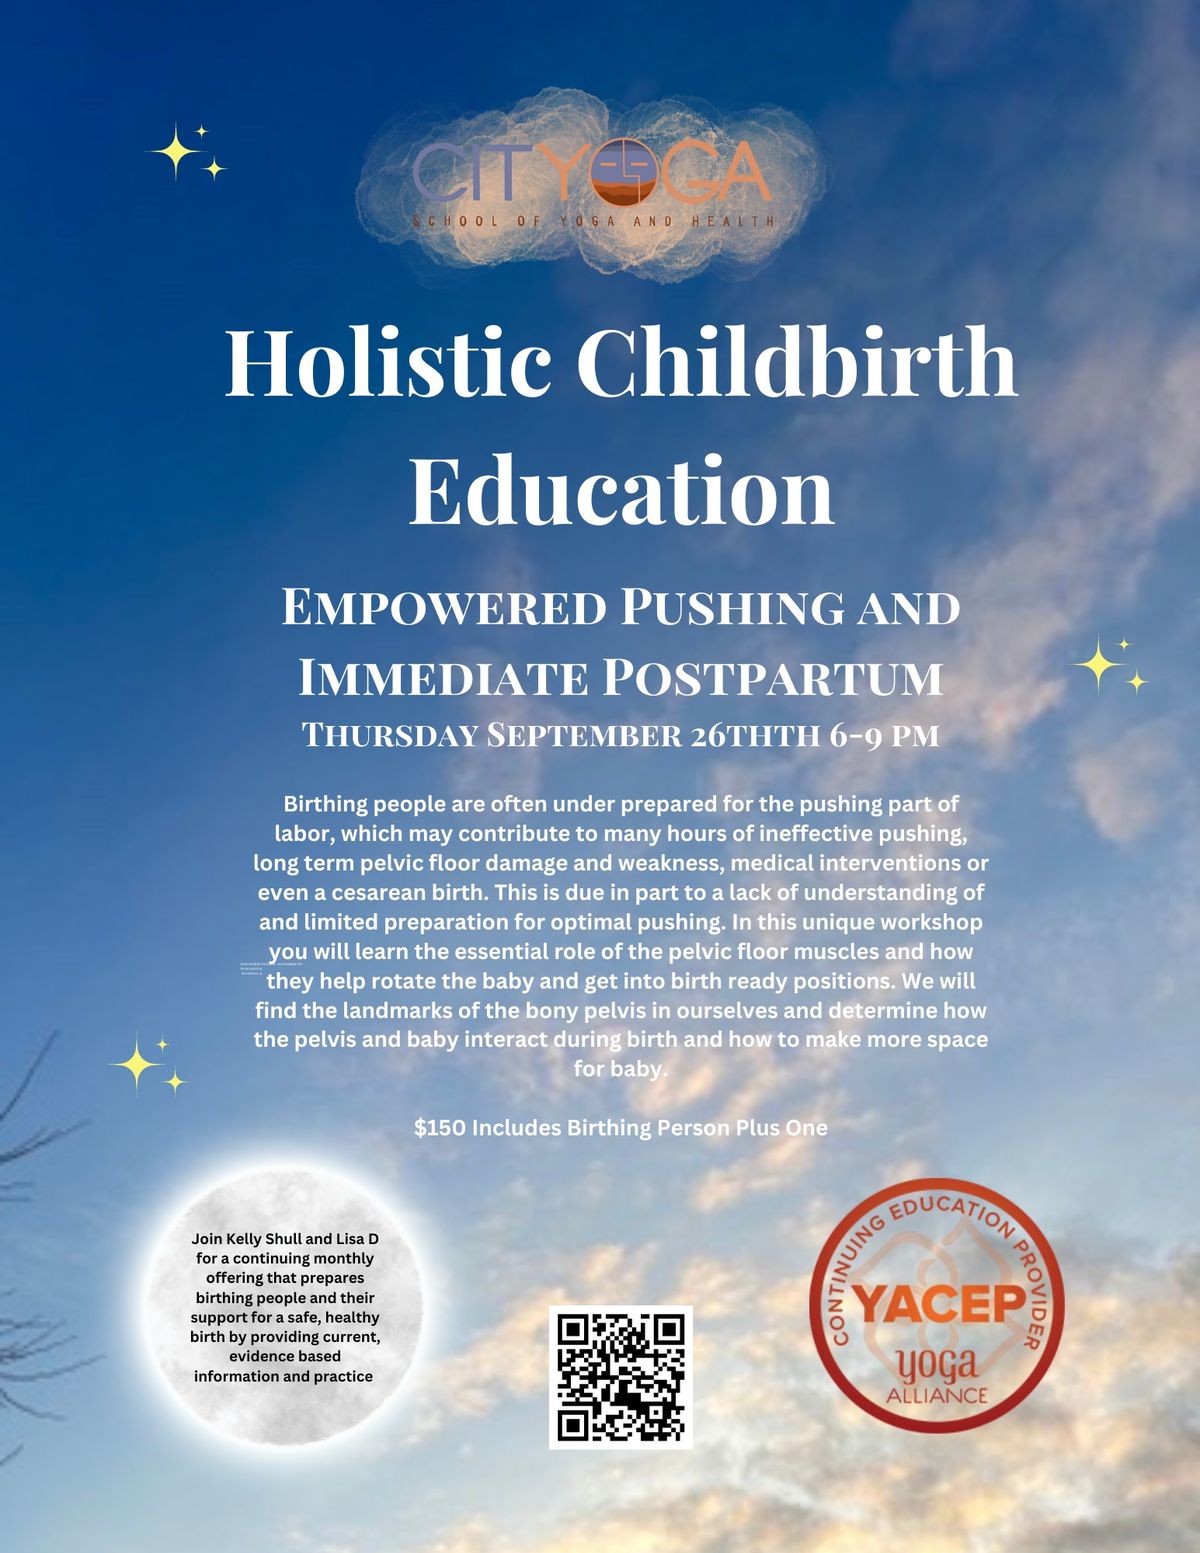 Holistic Childbirth Education: Empowered Pushing and Immediate Postpartum with Kelly and Lisa D